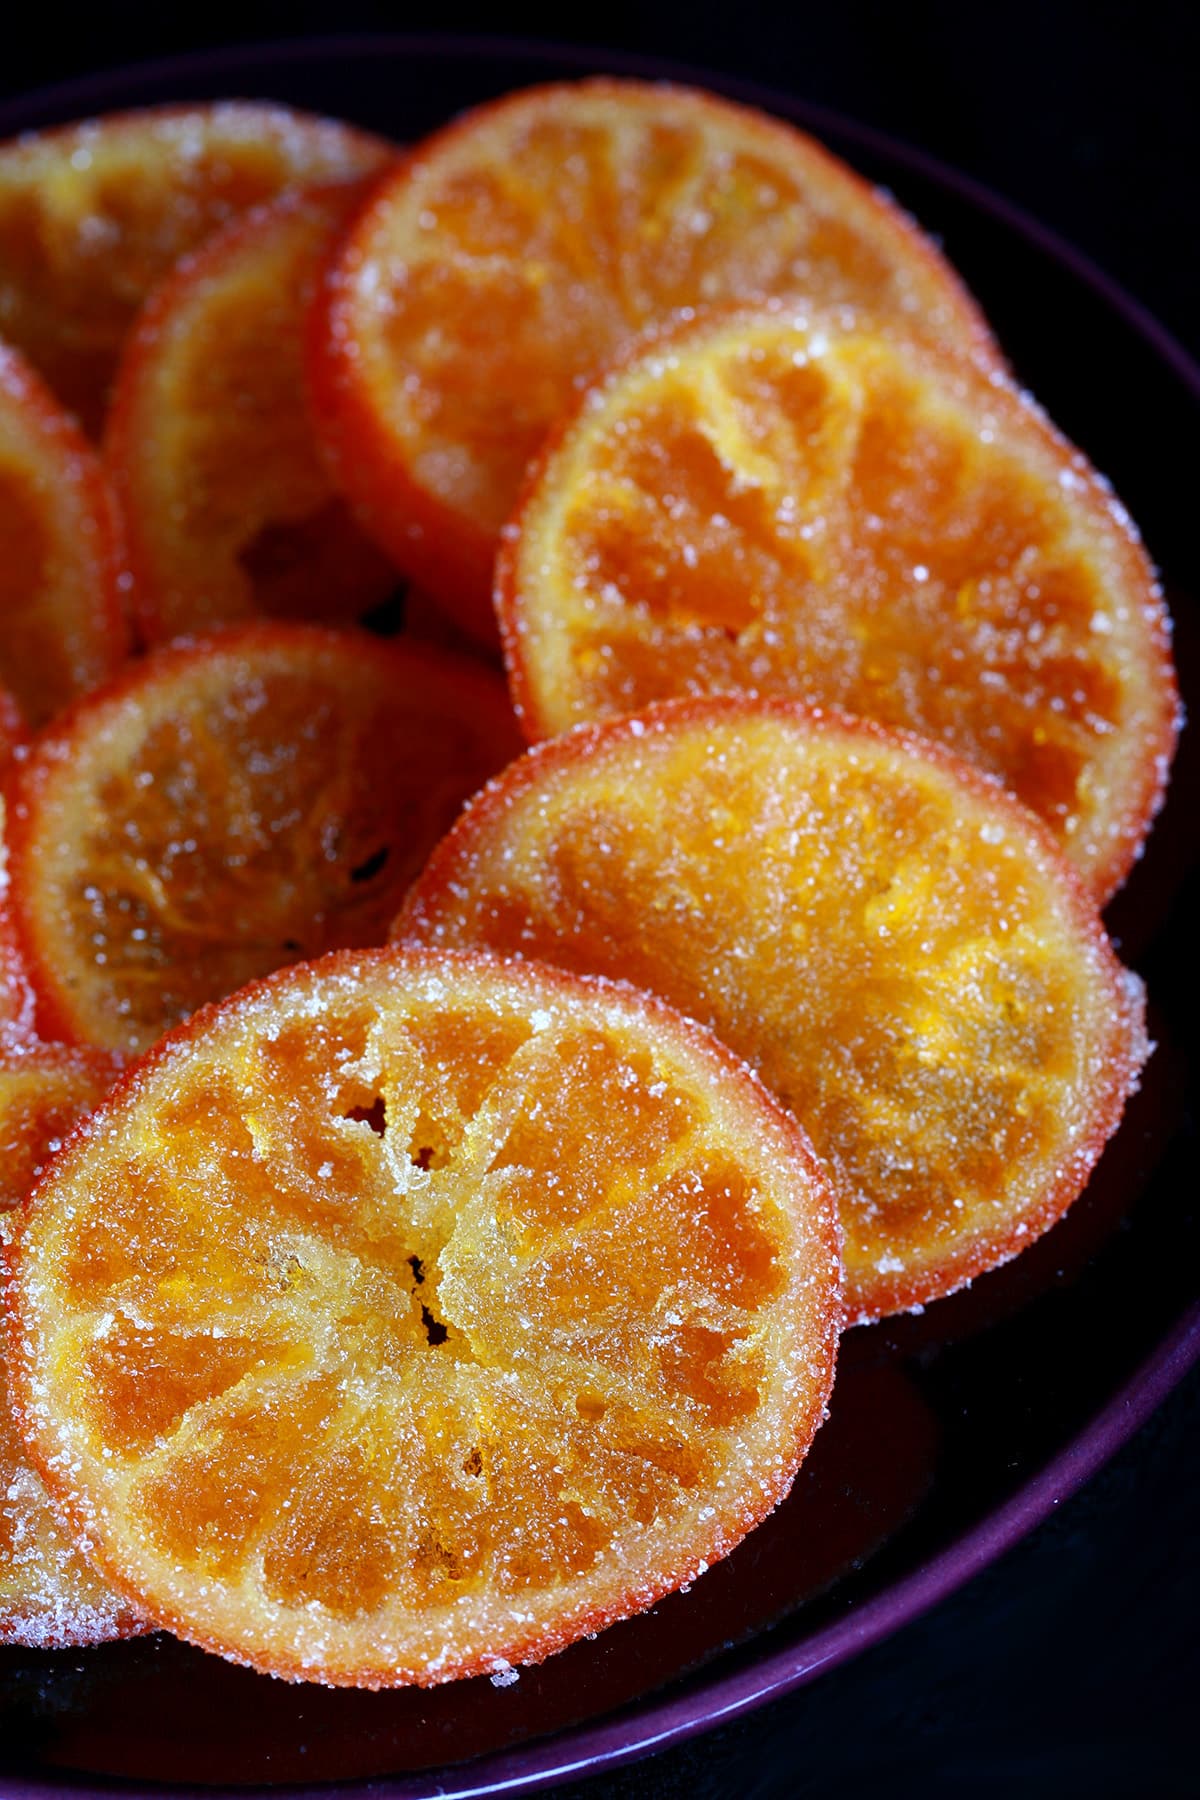 A blue plate with candied orange slices arranged on it.